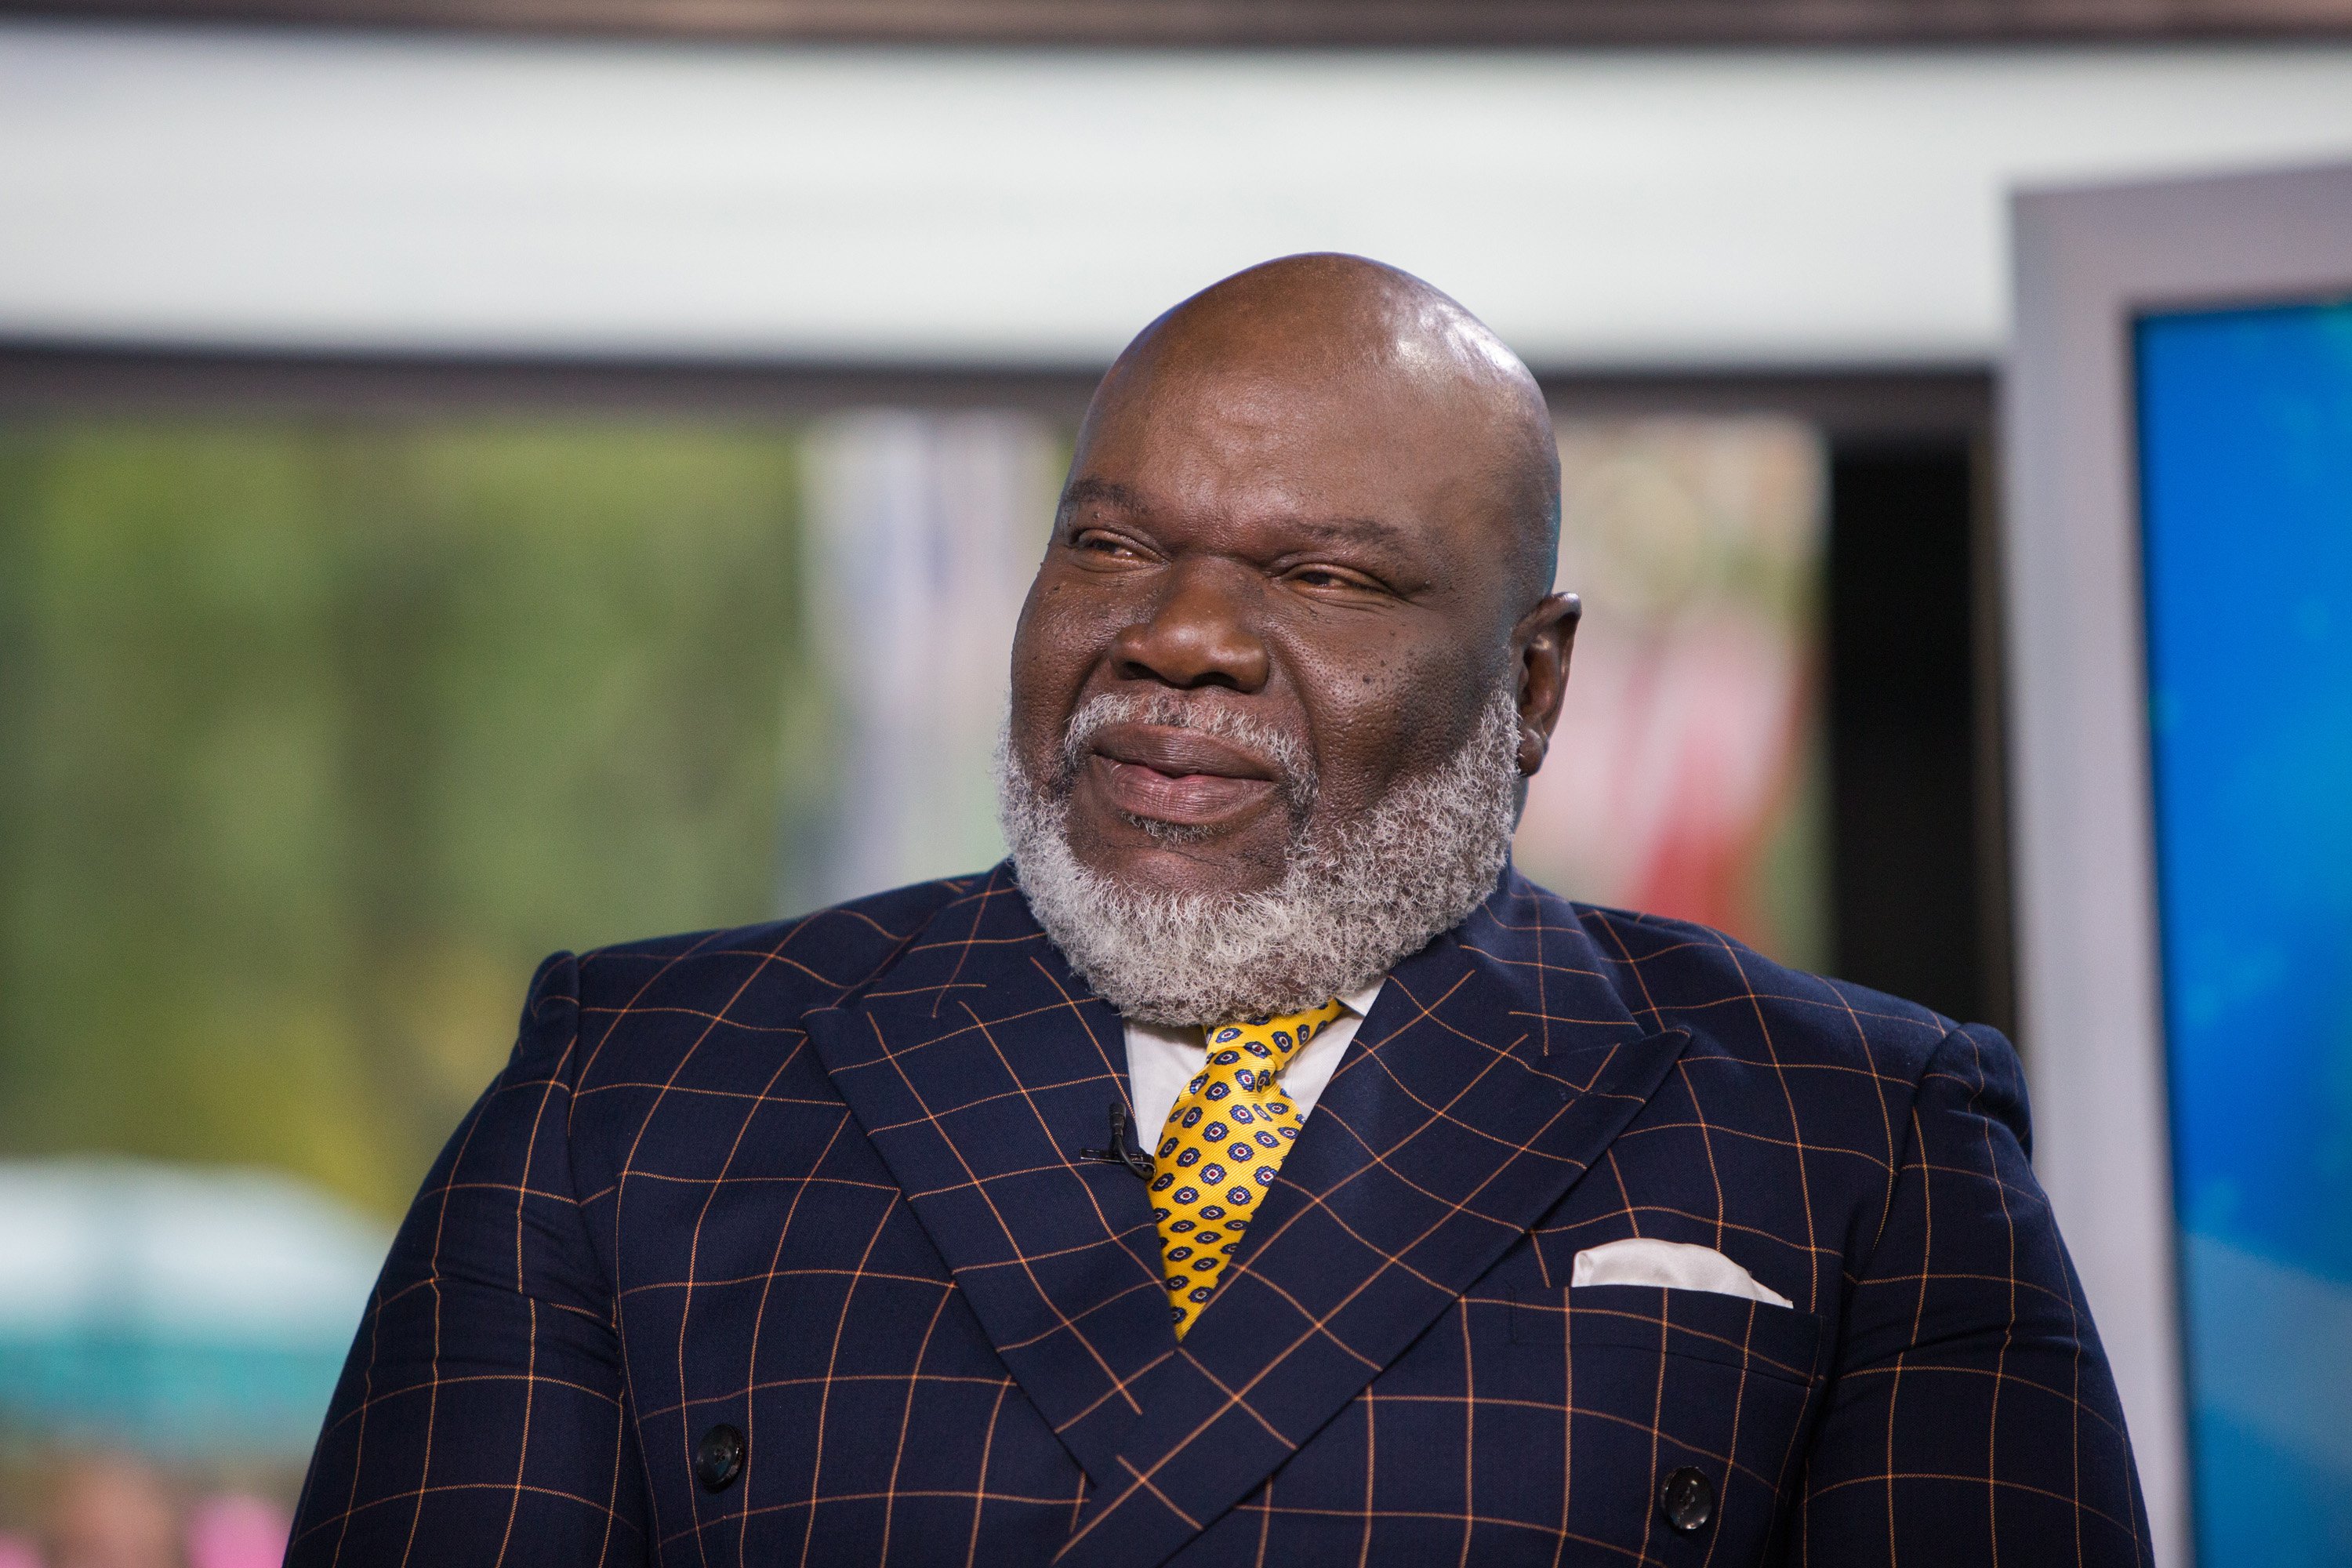 Bishop T.D. Jakes on the set of "Today" on Monday, October 9, 2017. | Photo: Getty Images